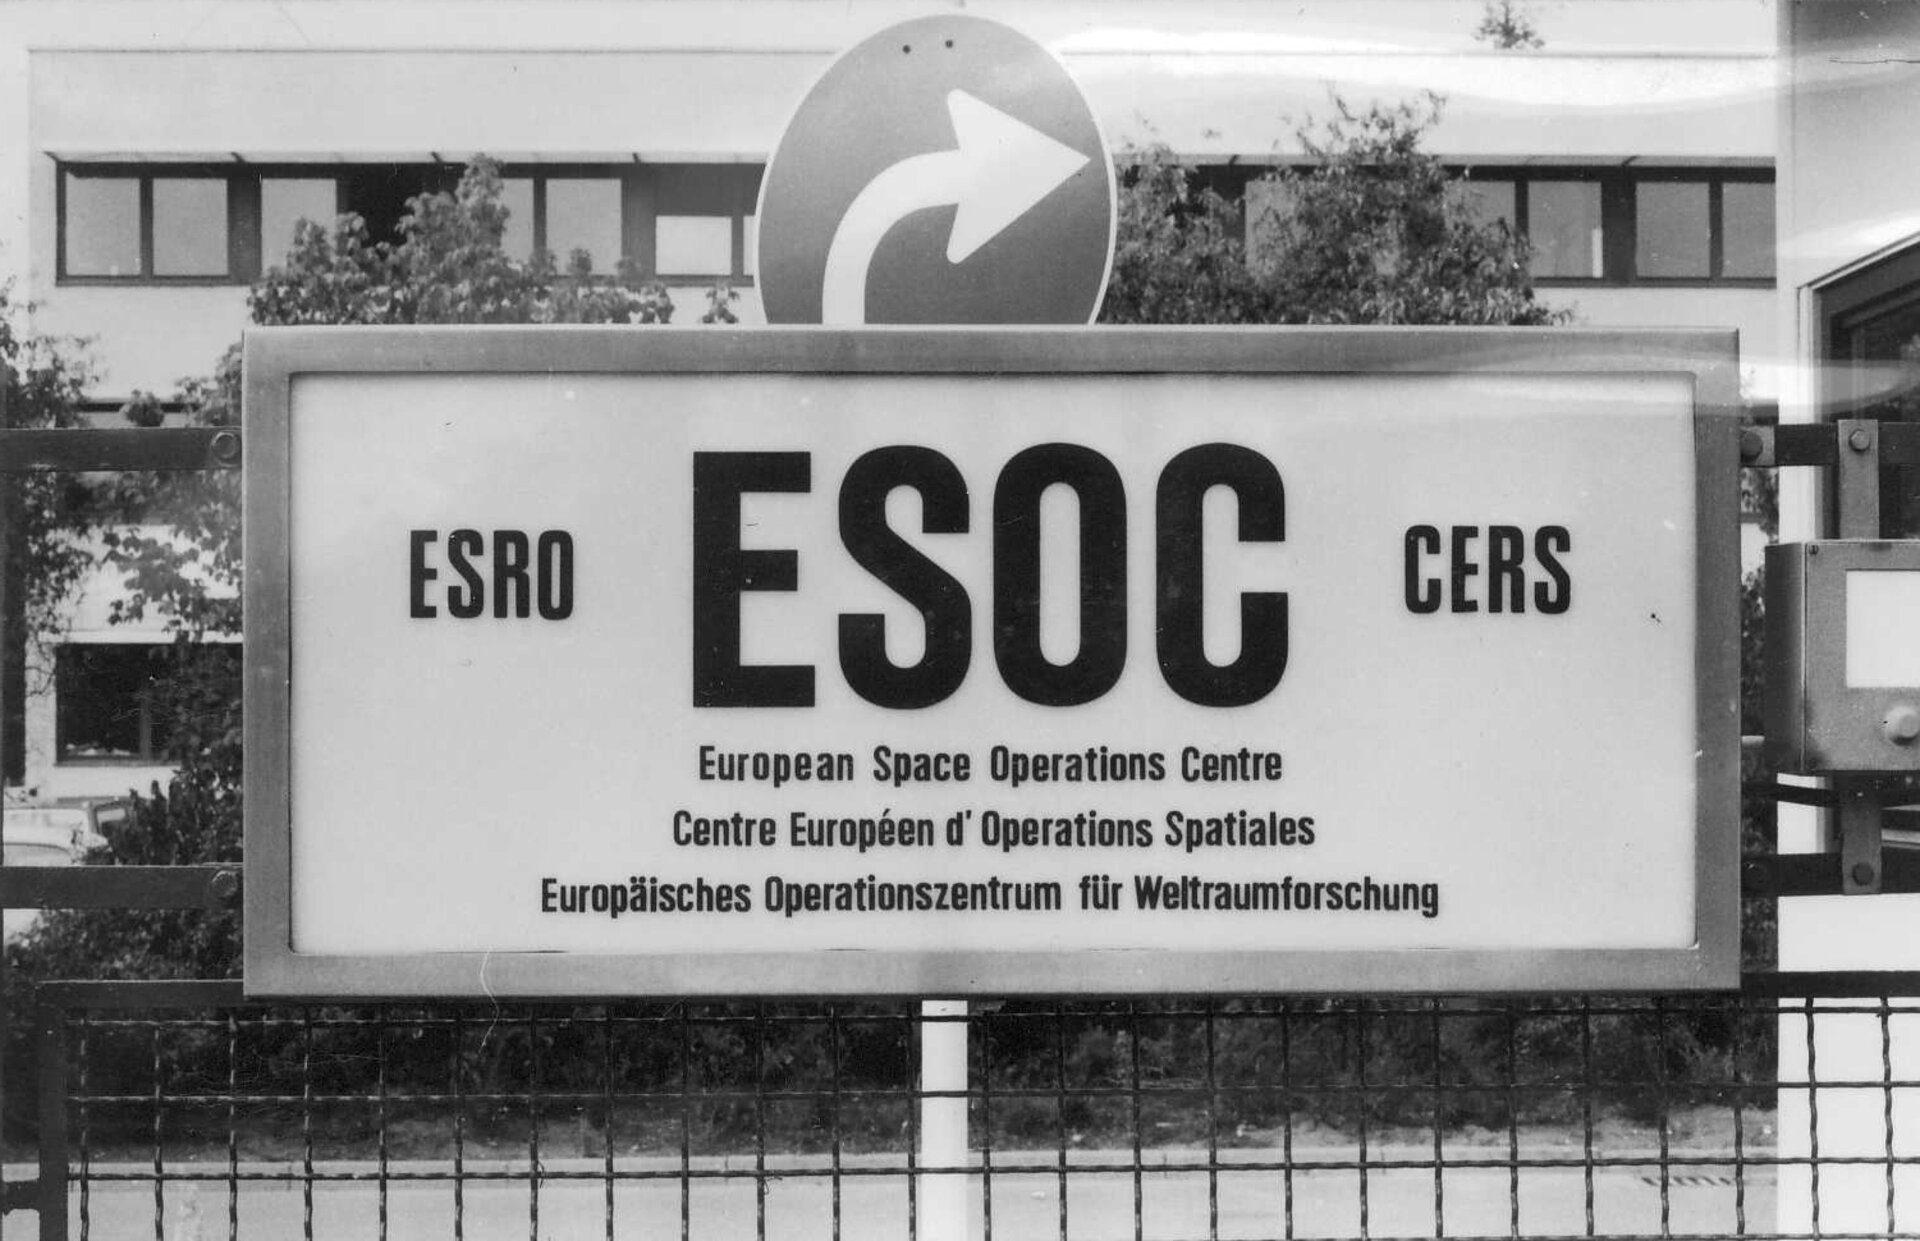 ESOC 1967, recently renamed from ESDAC (European Space Data Centre)